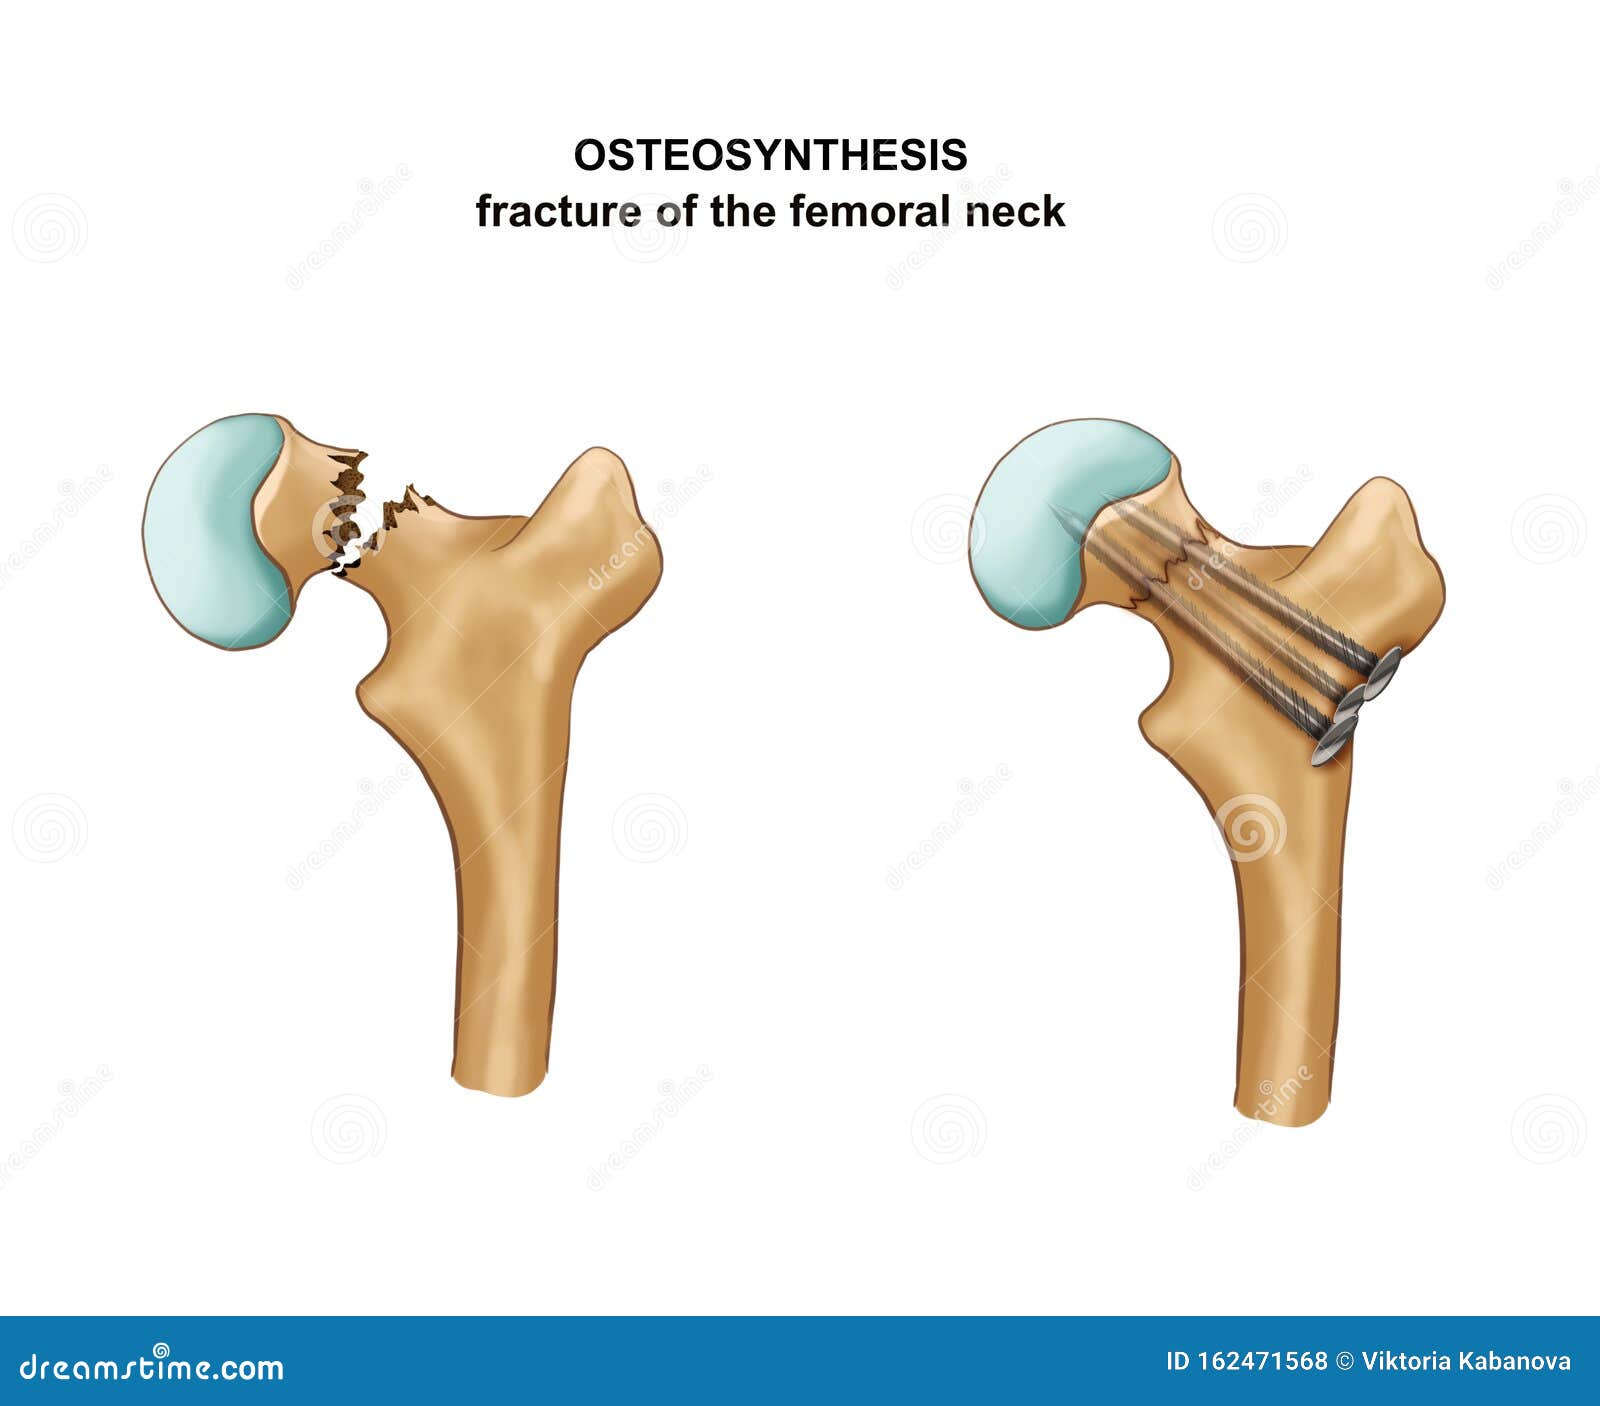 fracture of the femoral neck. osteosynthesis